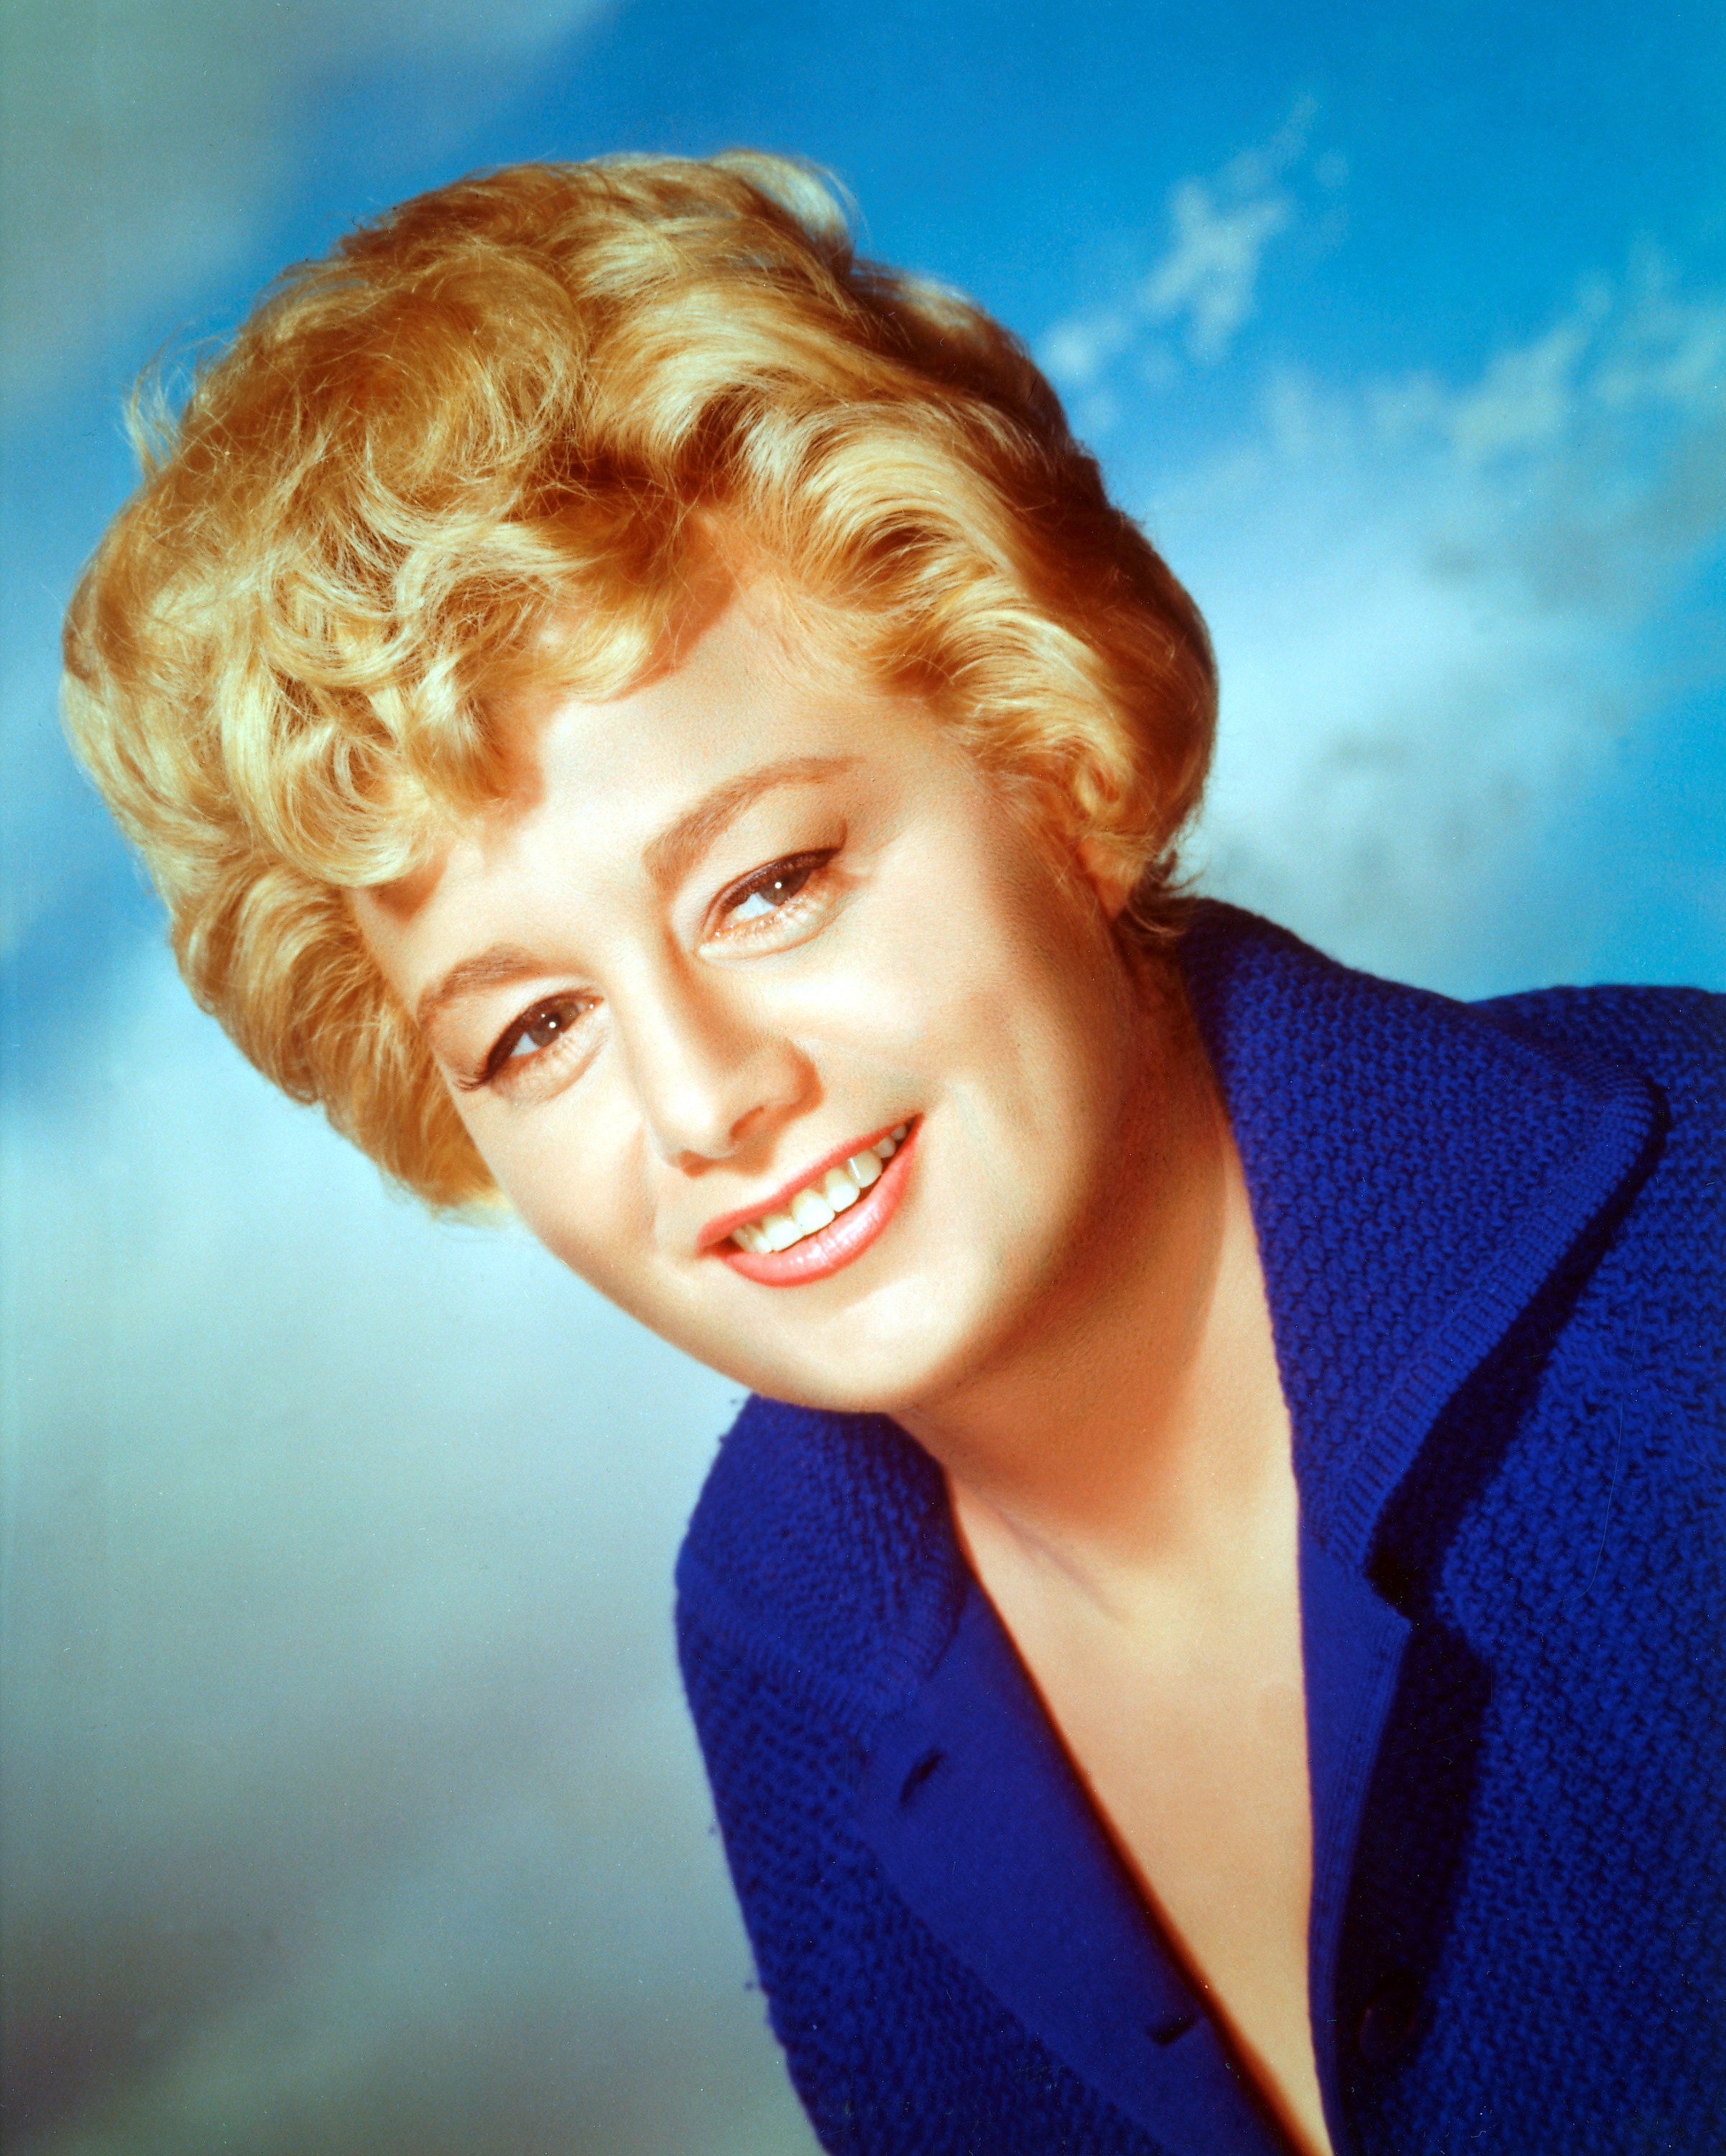 Shelley Winters (1920-2006), US actress, smiling and wearing a dark blue blouse in a studio portrait, against a background of blue sky and clouds, circa 1965. | Source: Getty Images